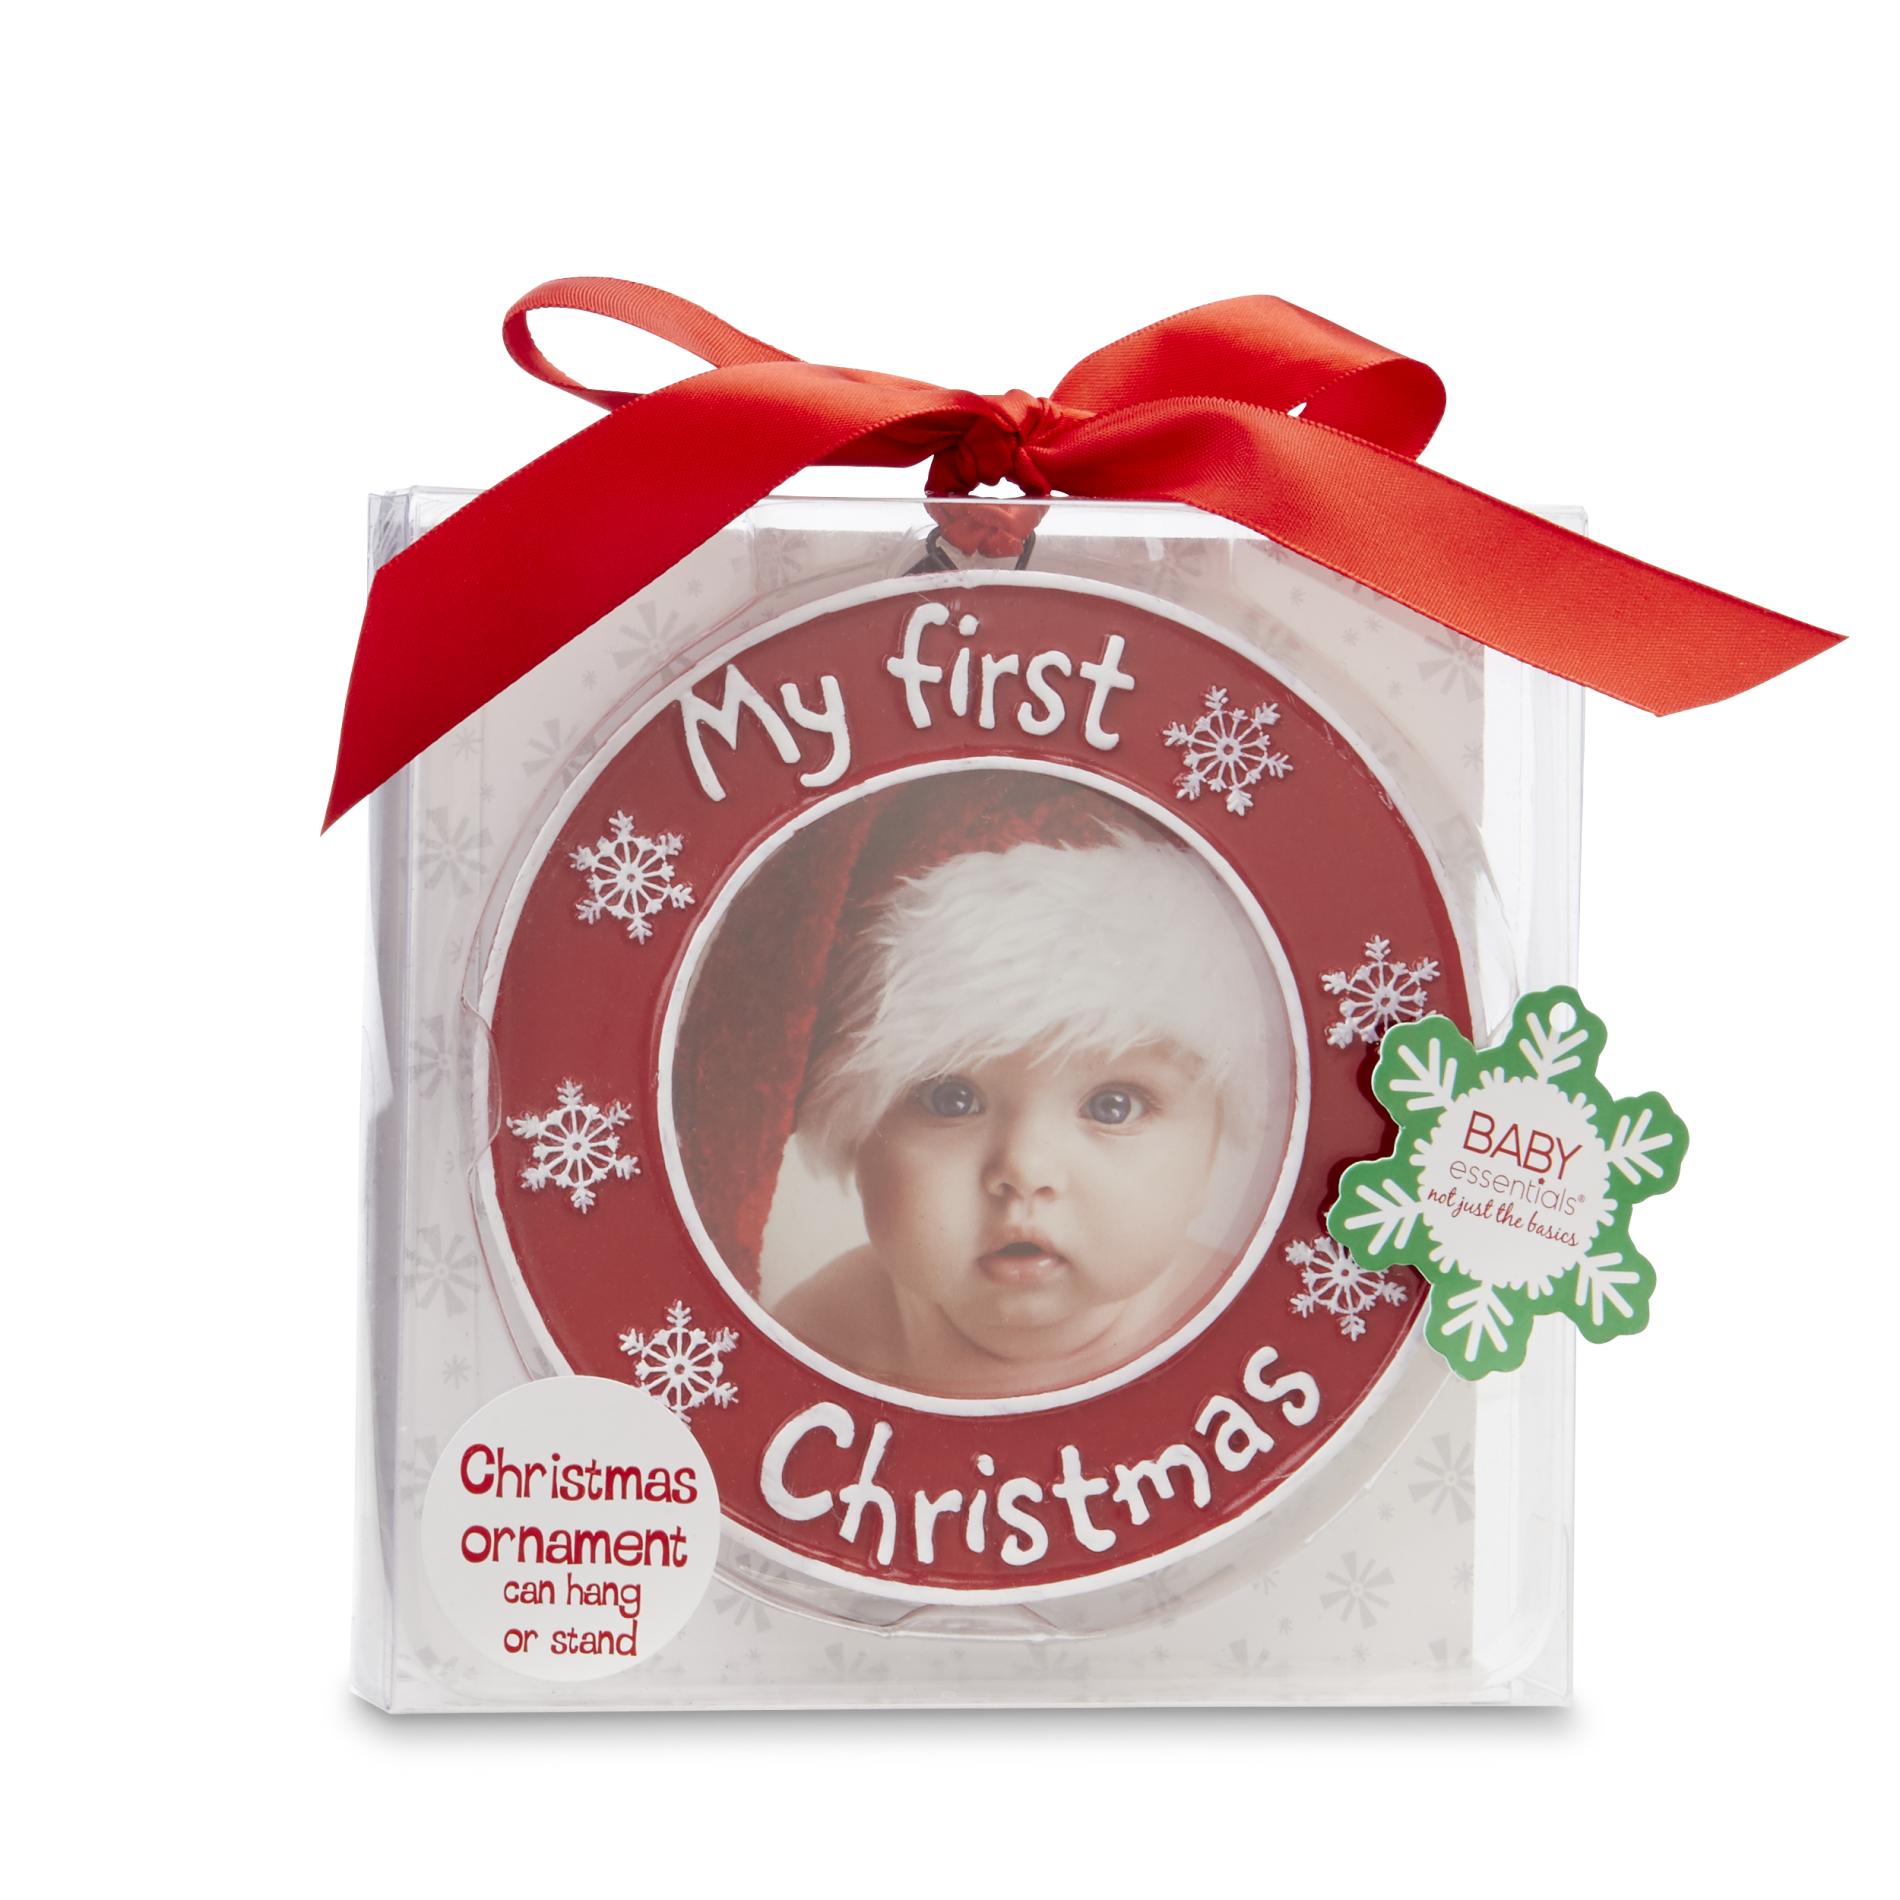 Baby Essentials Christmas Ornament - My First Christmas